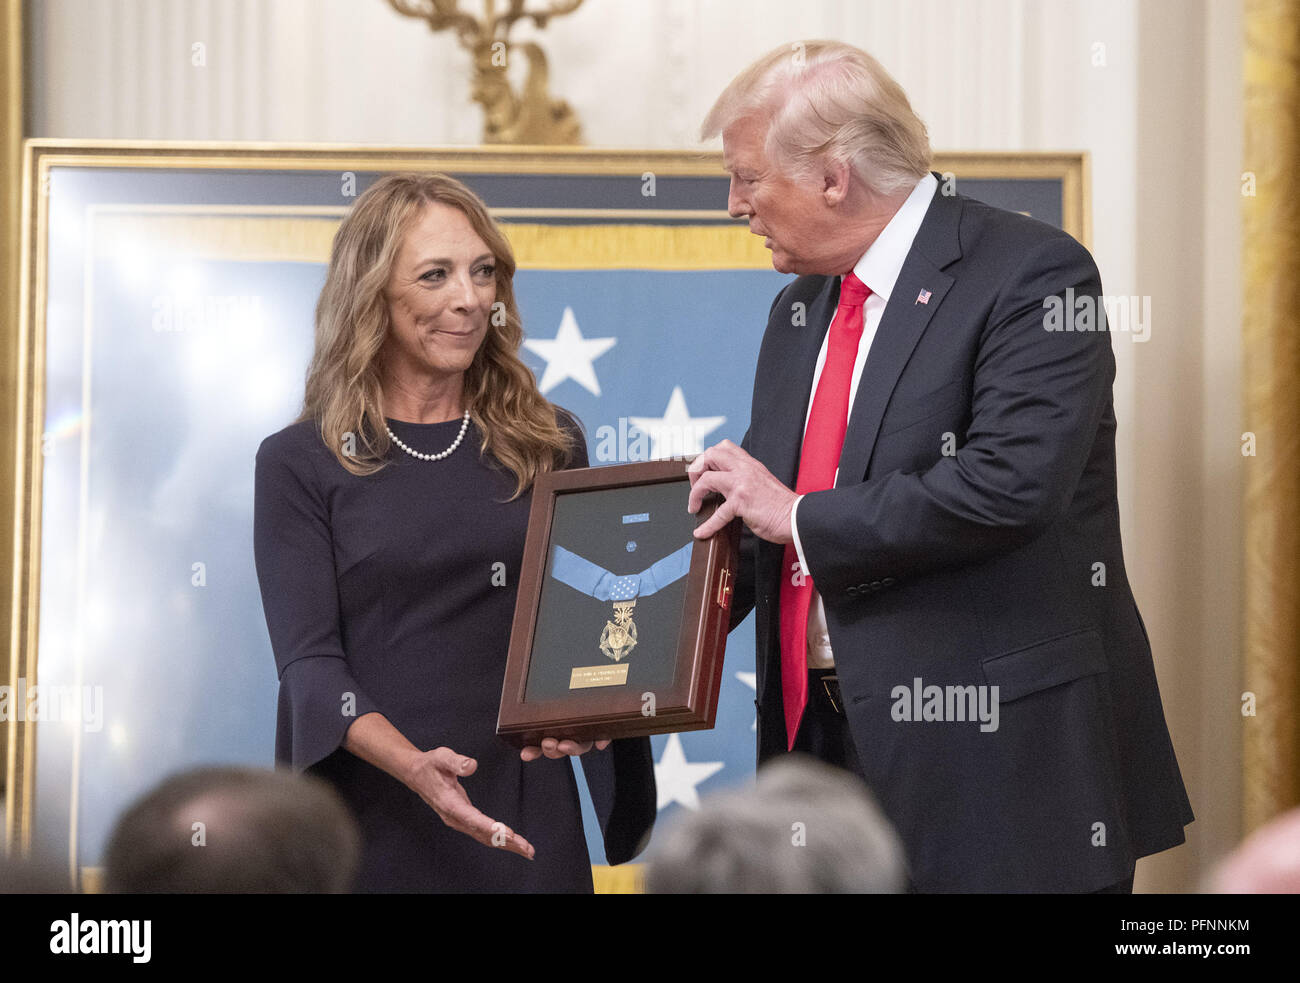 Washington, District of Columbia, USA. 22nd Aug, 2018. Valerie Nessel, widow of Technical Sergeant John A. Chapman, United States Air Force, left, stands with US President Donald J. Trump, center, as she accepts the Medal of Honor posthumously from the President during a ceremony in the East Room of the White House in Washington, DC on Wednesday, August 22, 2018. Sergeant Chapman is being honored for his actions on March 4, 2002, on Takur Ghar mountain in Afghanistan where he gave his life to save his teammates Credit: Ron Sachs/CNP/ZUMA Wire/Alamy Live News Stock Photo